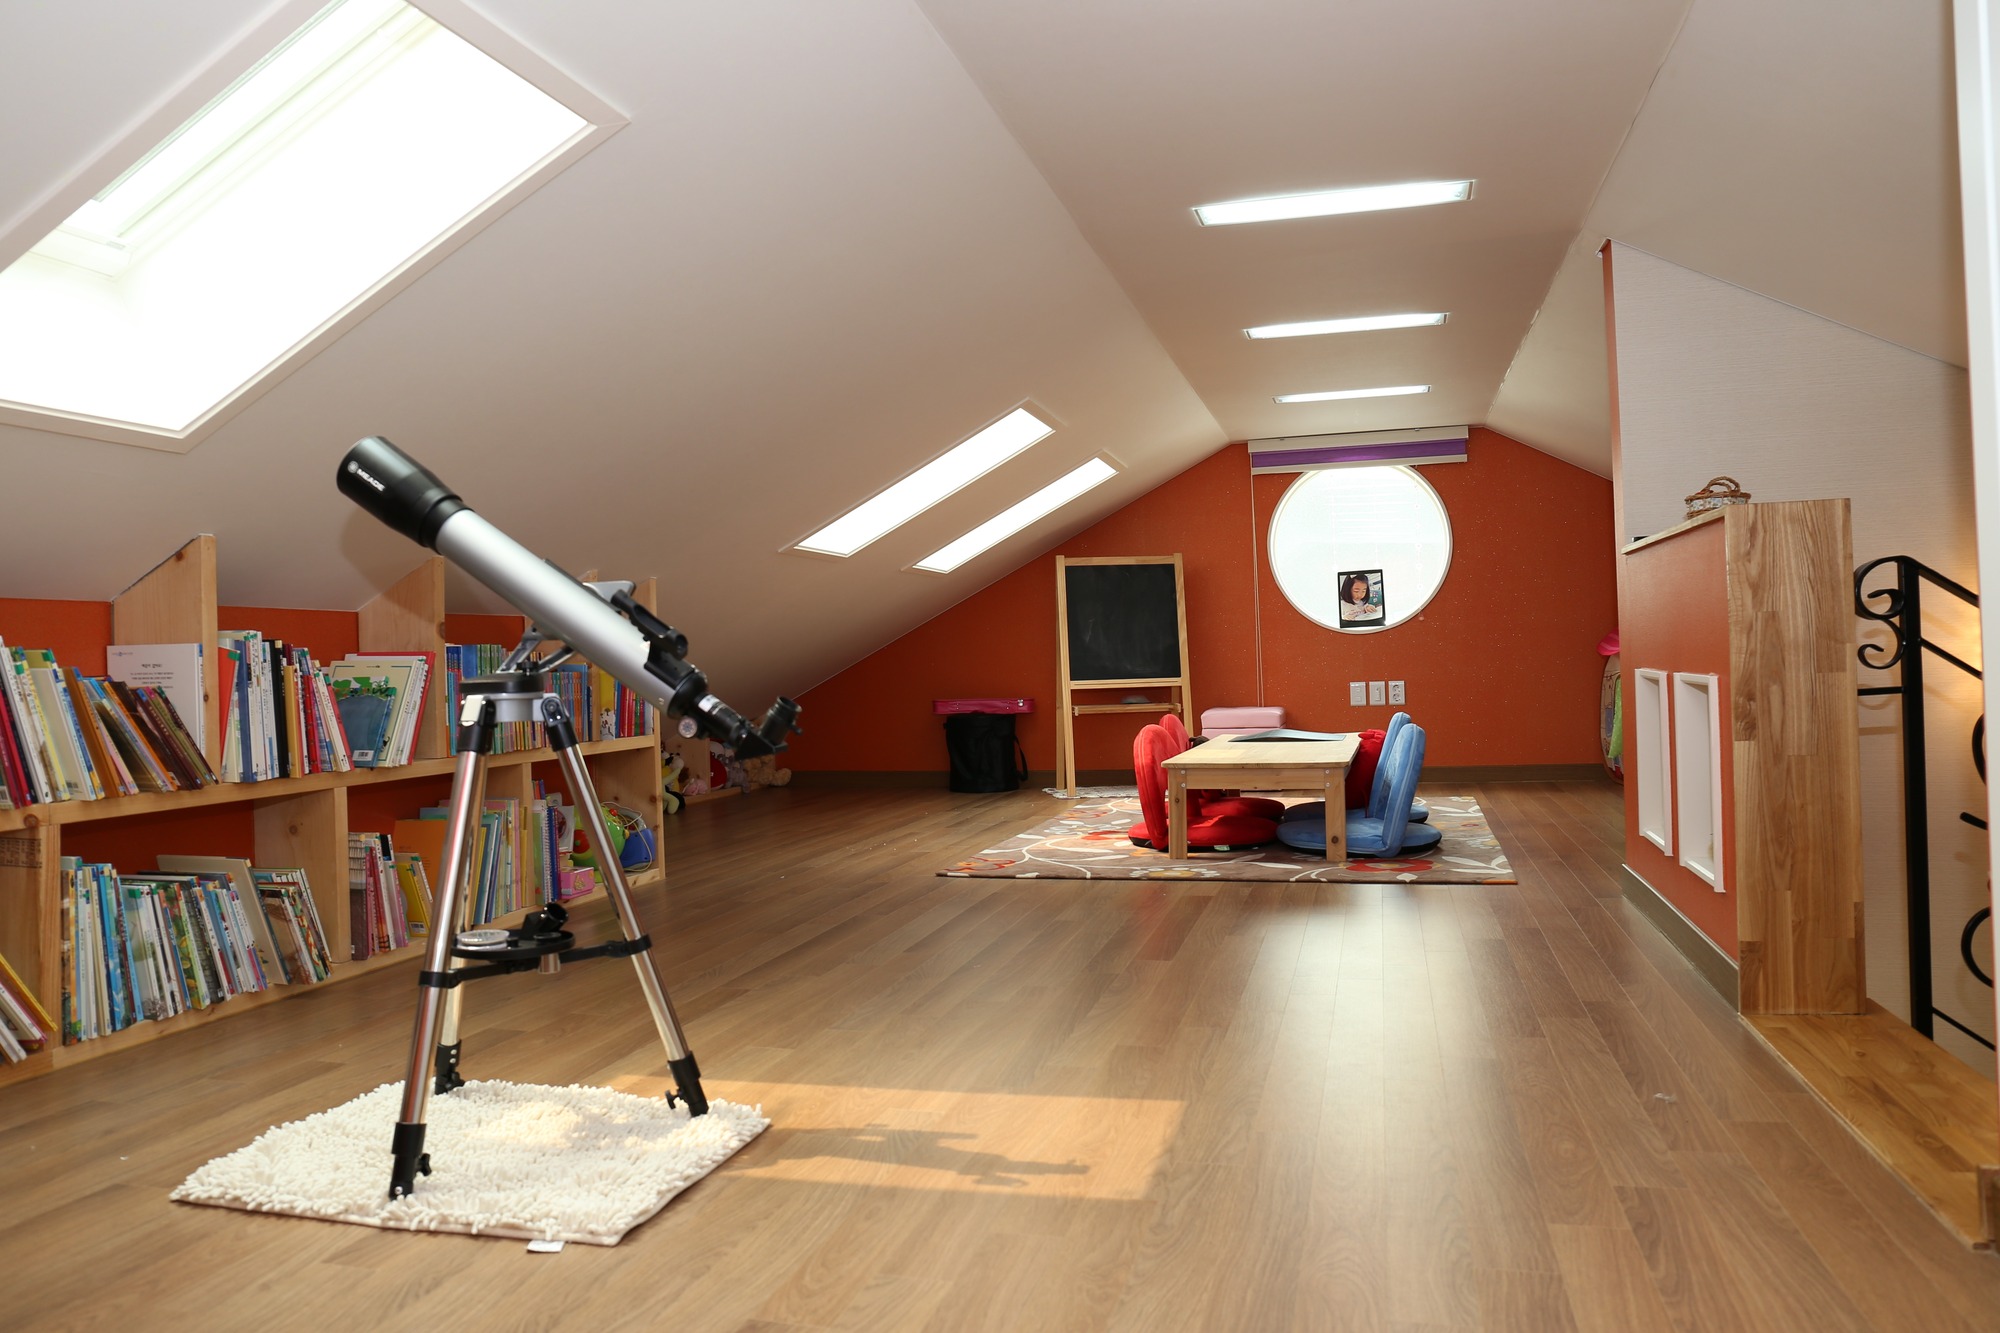 A Clean Attic Is Yours With Professional House Cleaners